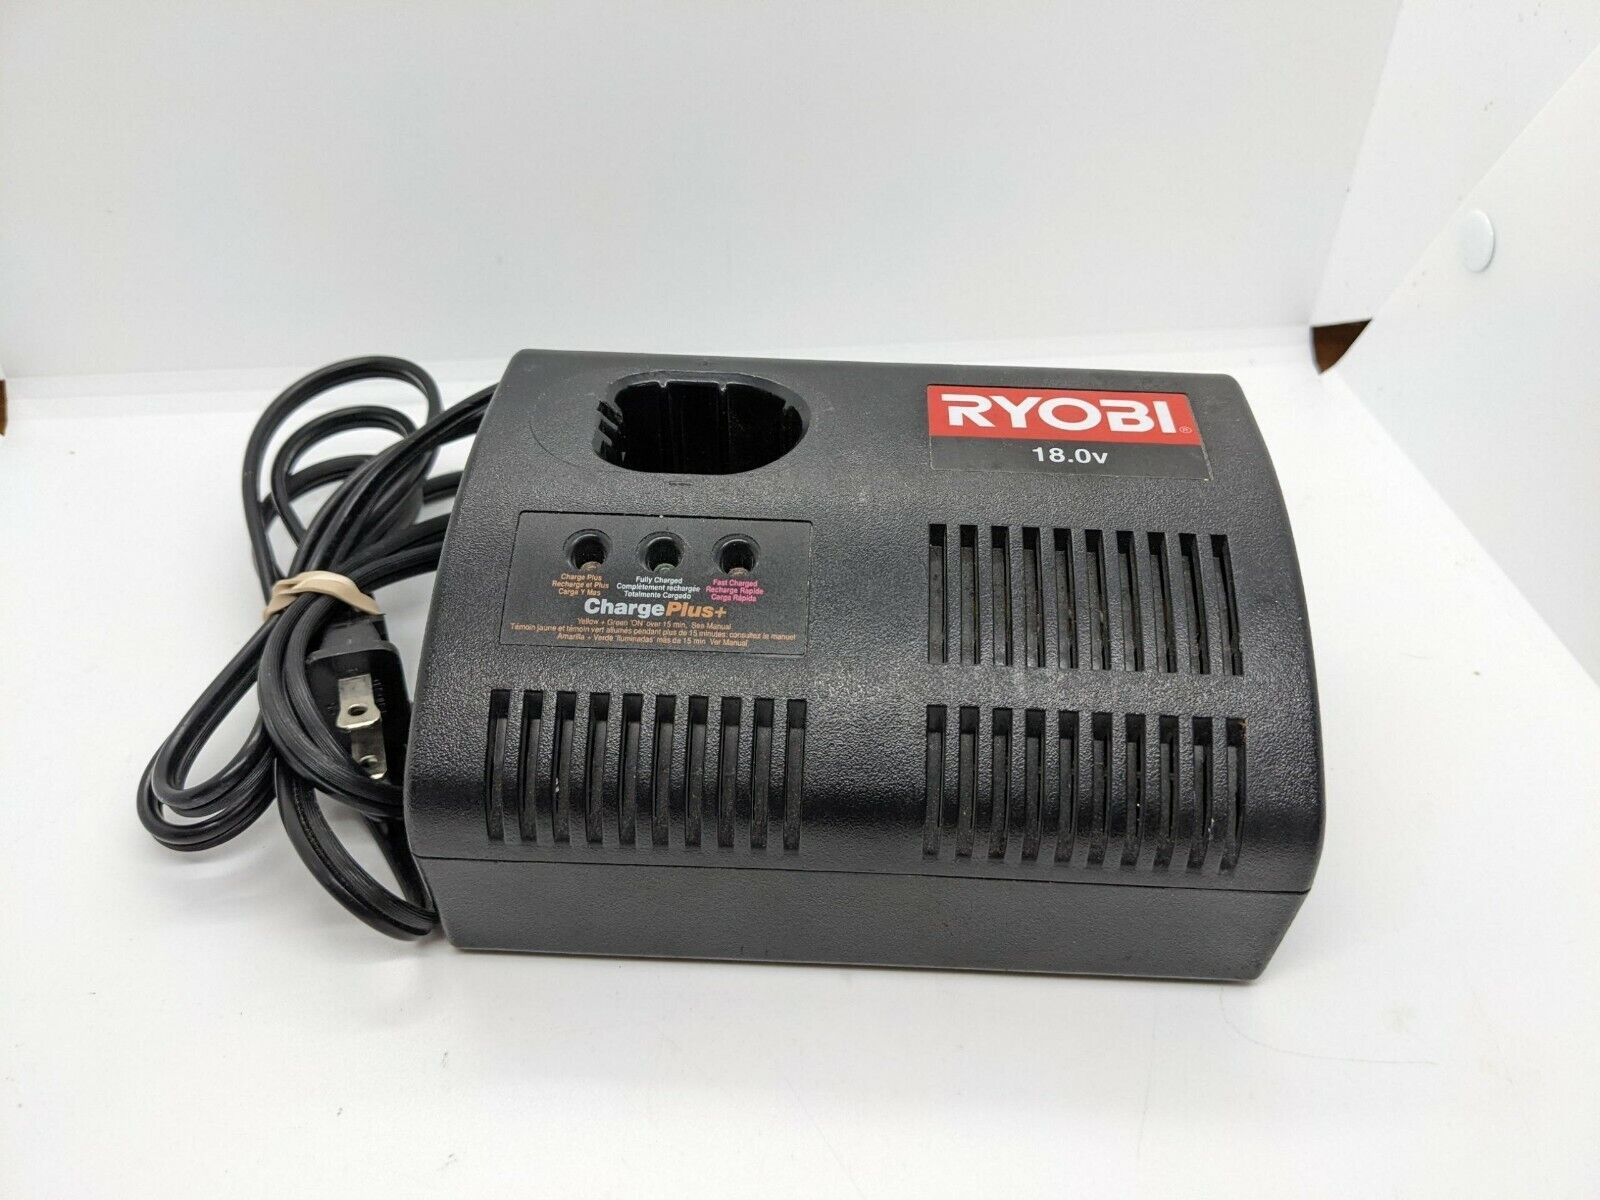 Ryobi Charge Plus+ 18V Battery Charger - P110 All items in the store Free shipping New Working 1423701 Tested